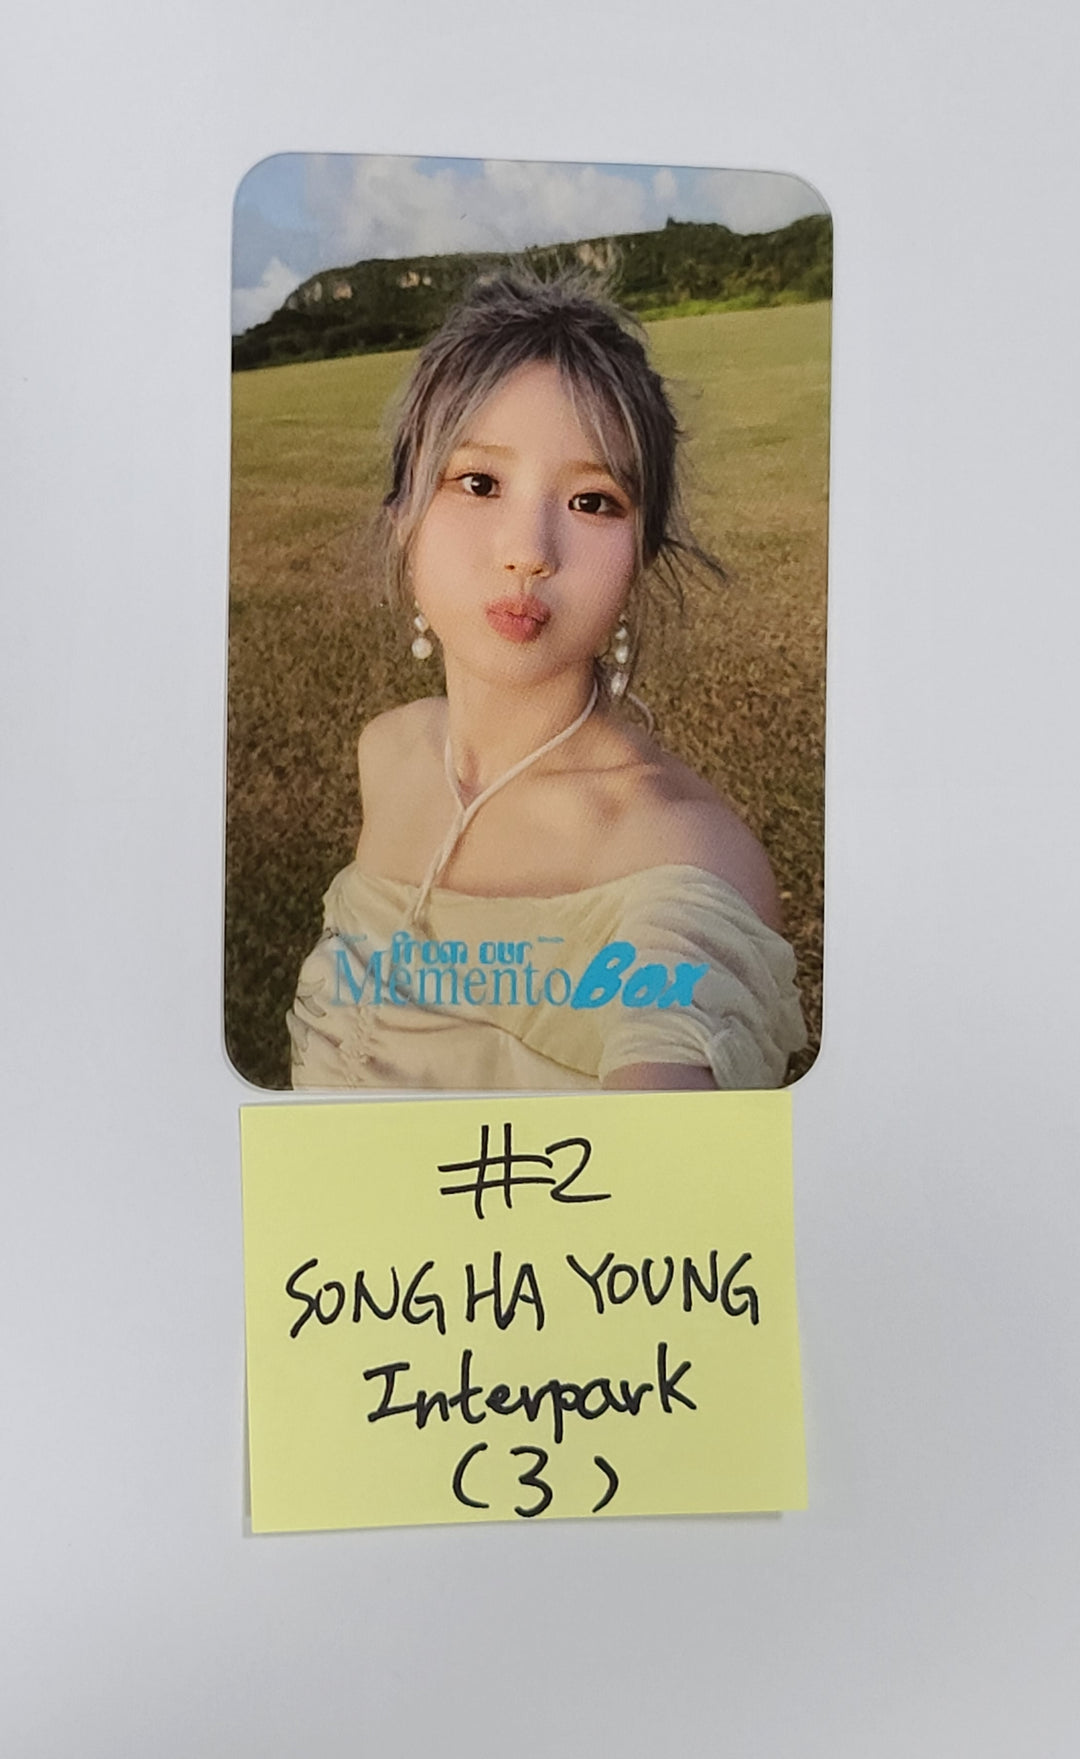 Fromis_9 "from our Memento Box" - Interpark Pre-Order Benefit Transparent PVC Photocard